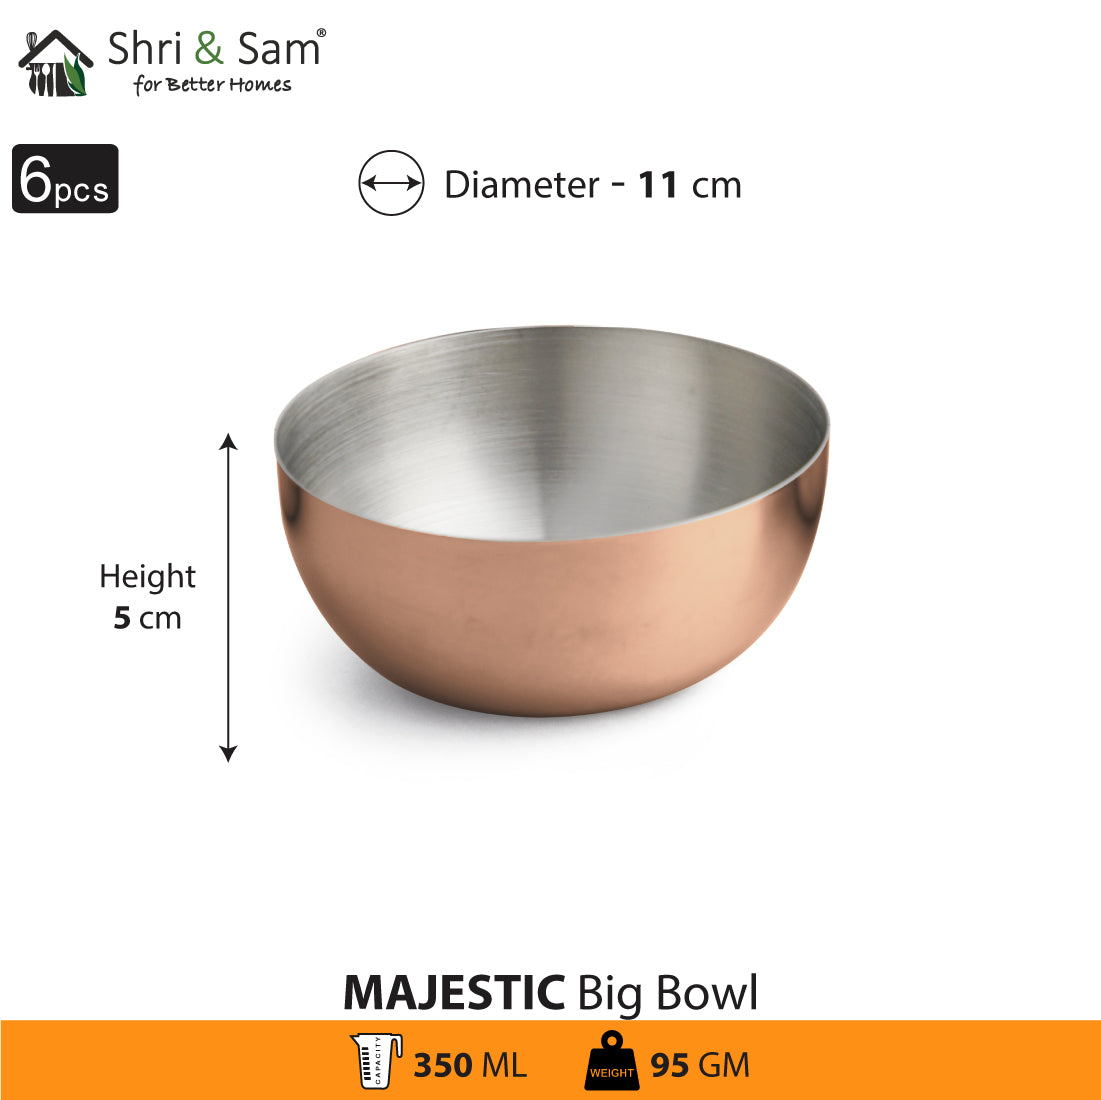 Stainless Steel 6 PCS Big Bowl with Rose Gold PVD Coating Majestic